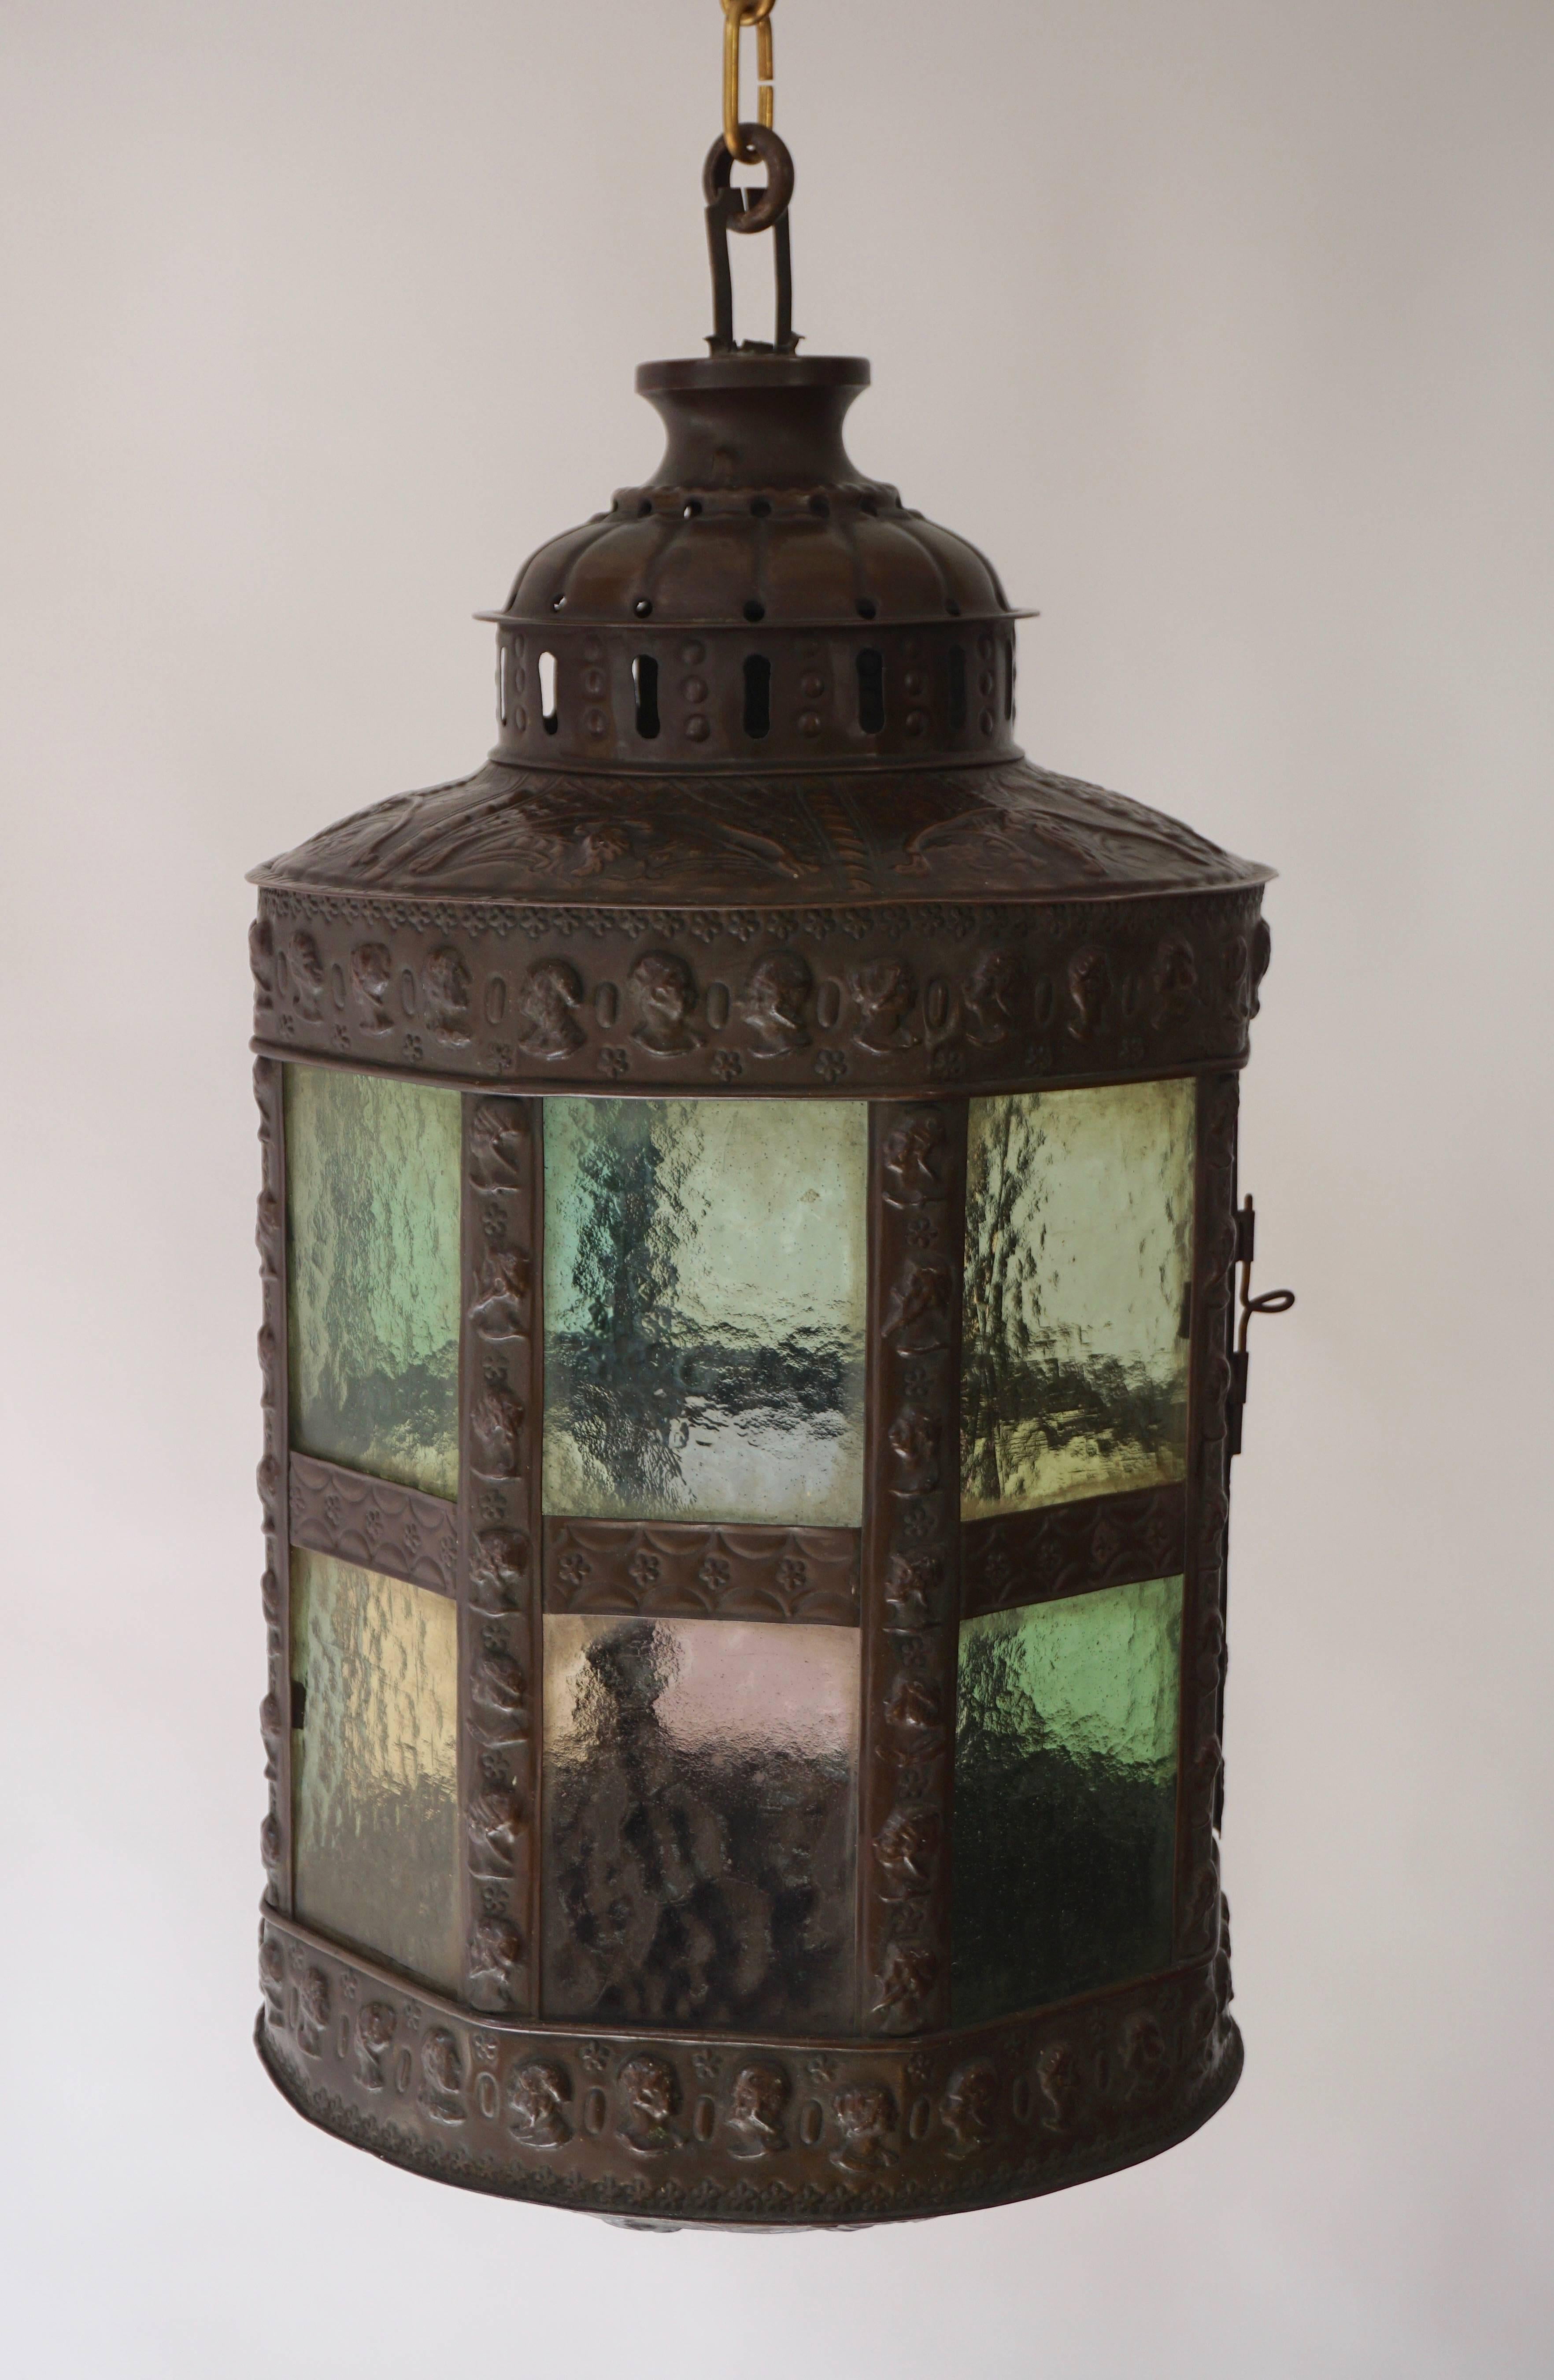 Copper lantern with stained glass.
Diameter 32 cm.
Height 60 cm.